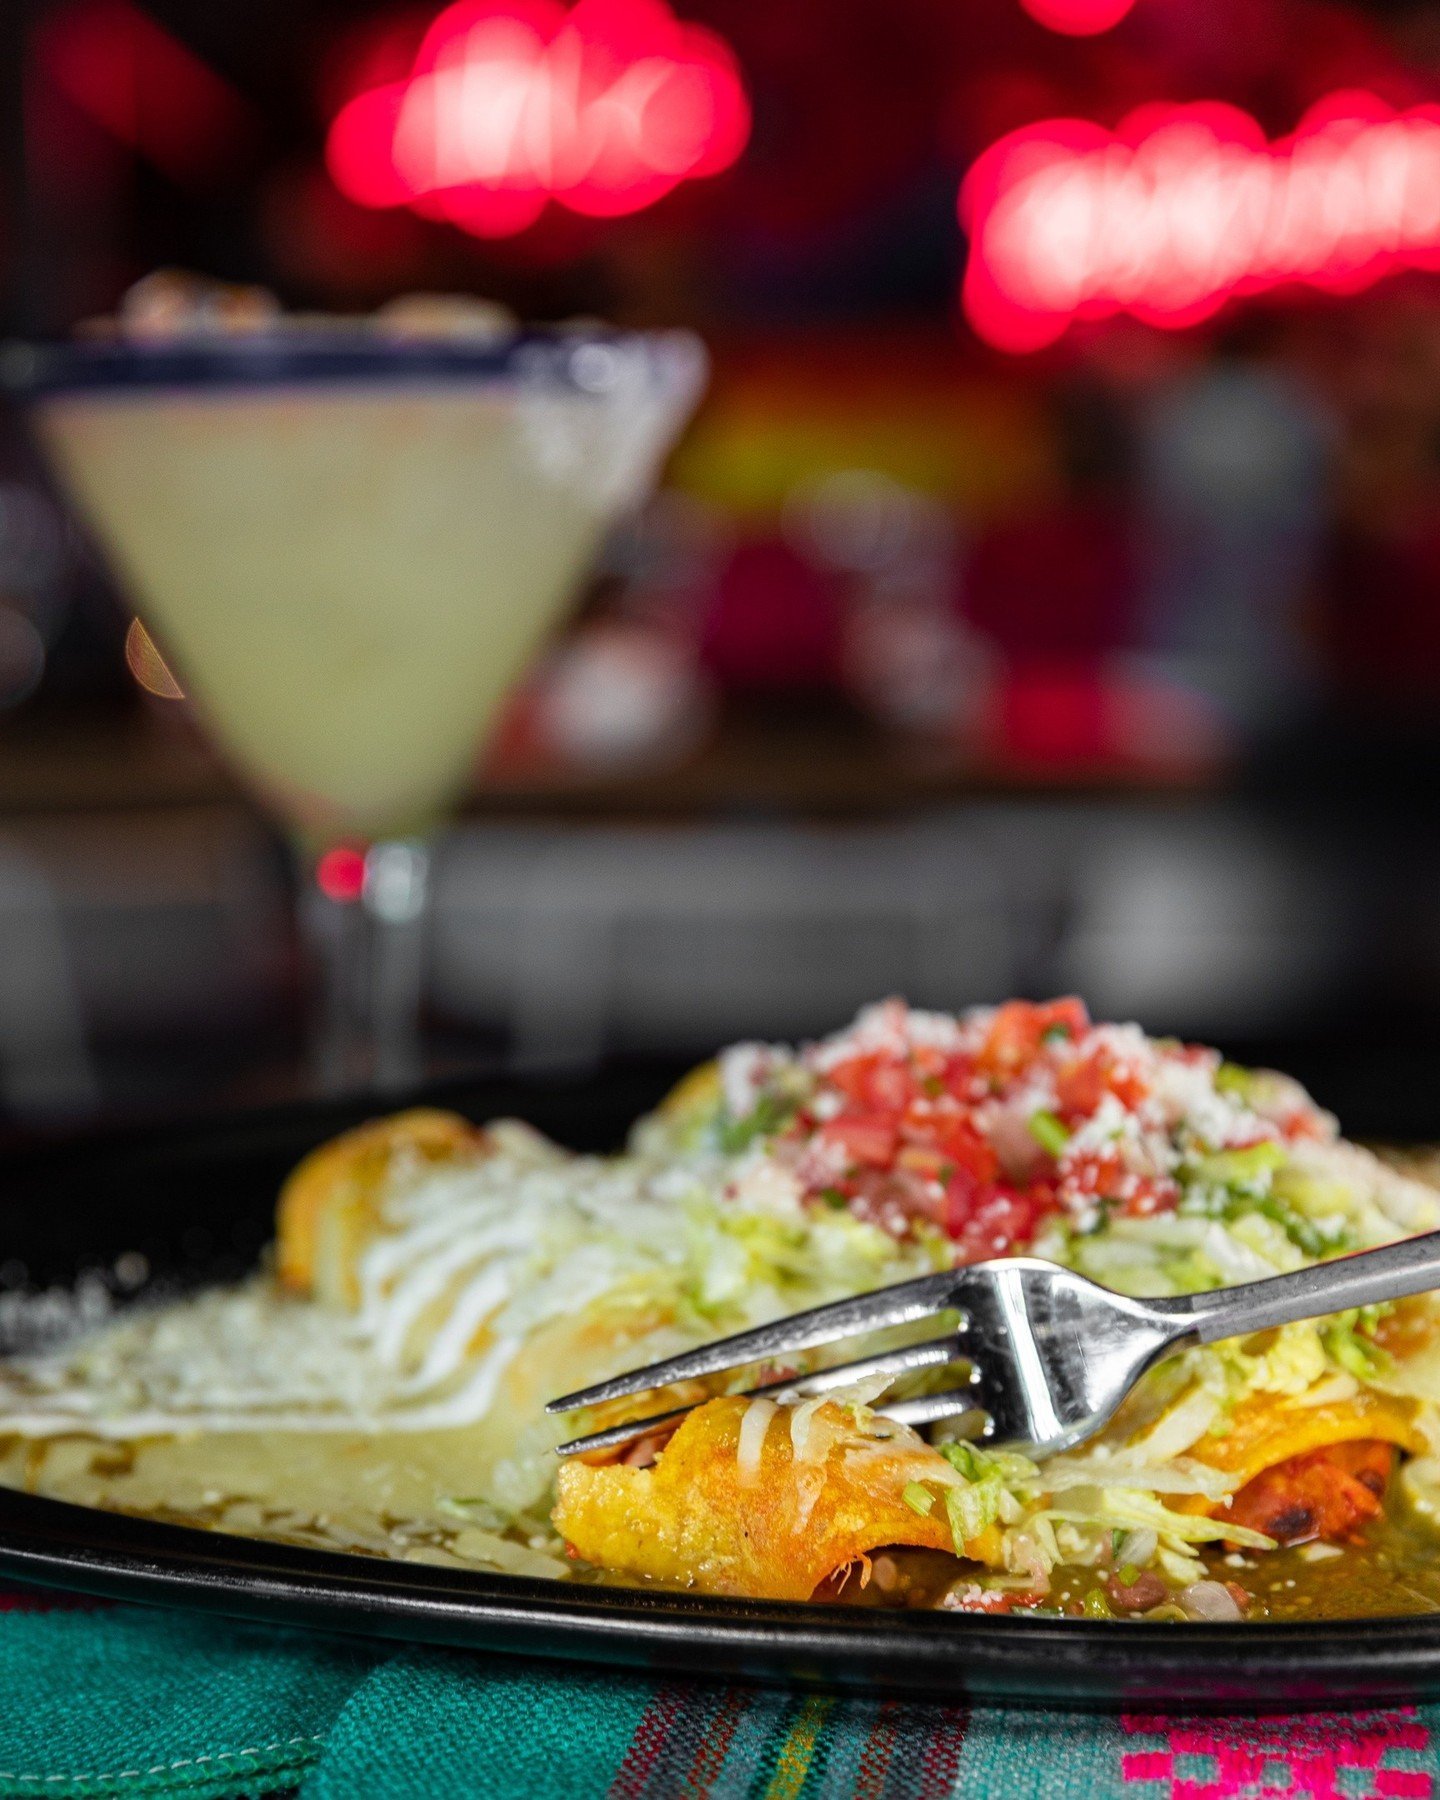 Margs and Enchiladas? 👀⁠
⁠
Don't have to ask me twice 🔥⁠
⁠
See you at Mexicano 🏃🏃&zwj;♀️⁠
.⁠
.⁠
.⁠
#themexicano #themexicanocomida #azfood #ChefJoey #ChefJoeyMaggiore #ChefJoeyConcepts